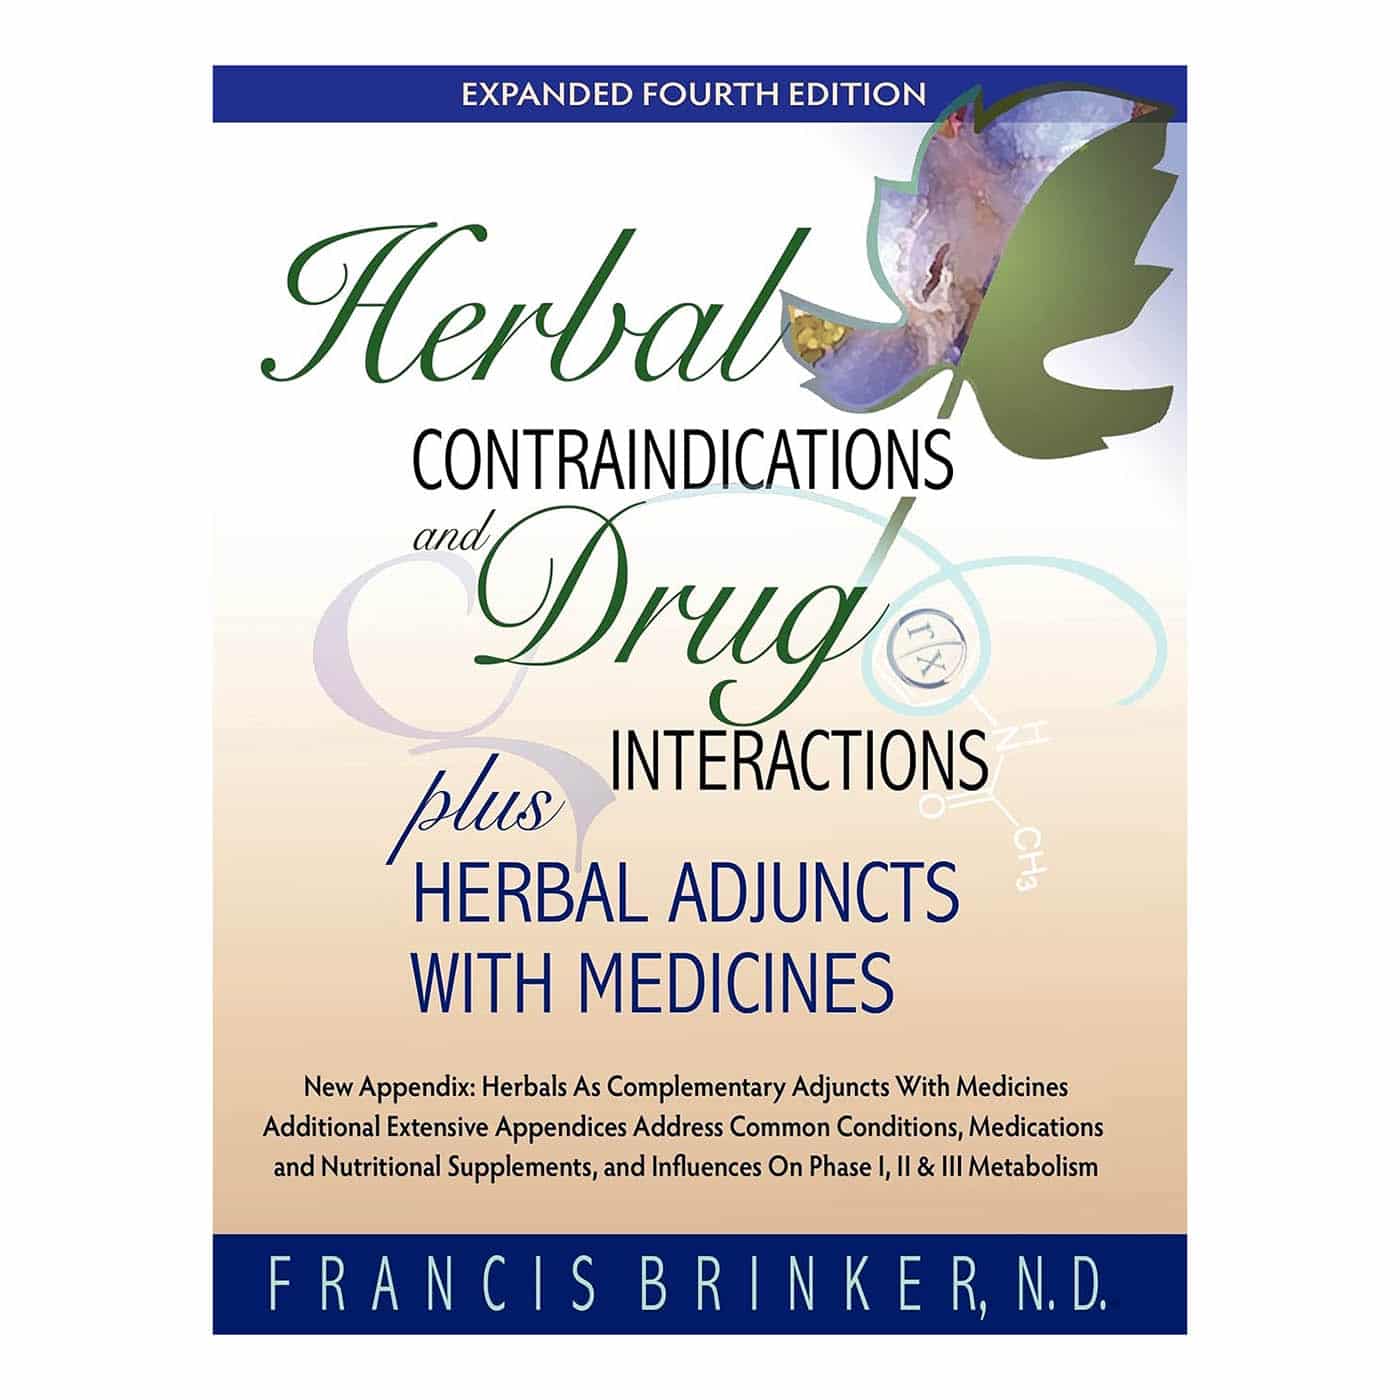 Herbal Contraindications and Drug Interactions: Plus Herbal Adjuncts with Medicines, 4th Edition